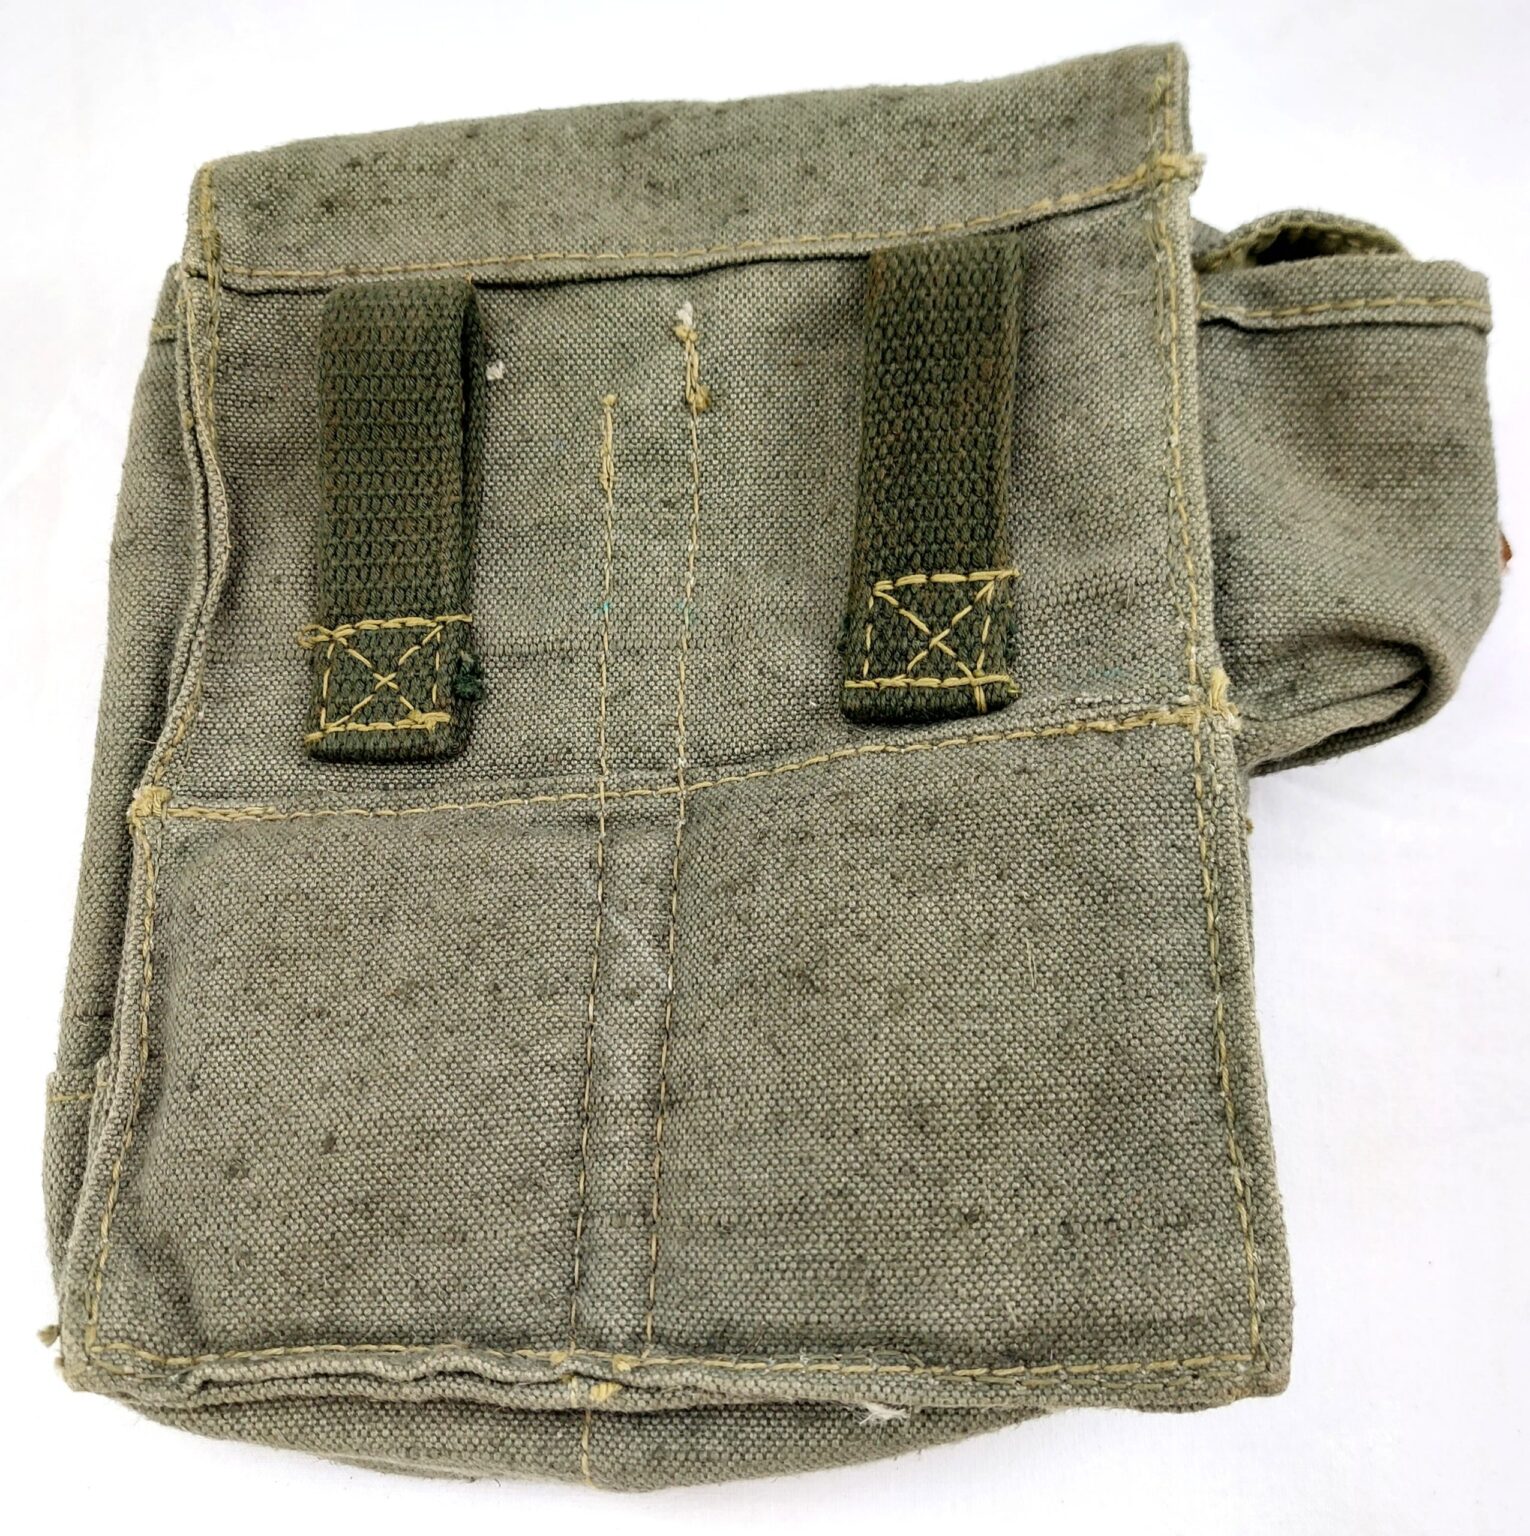 M70 Magazine Pouch Archives - Sally Antiques